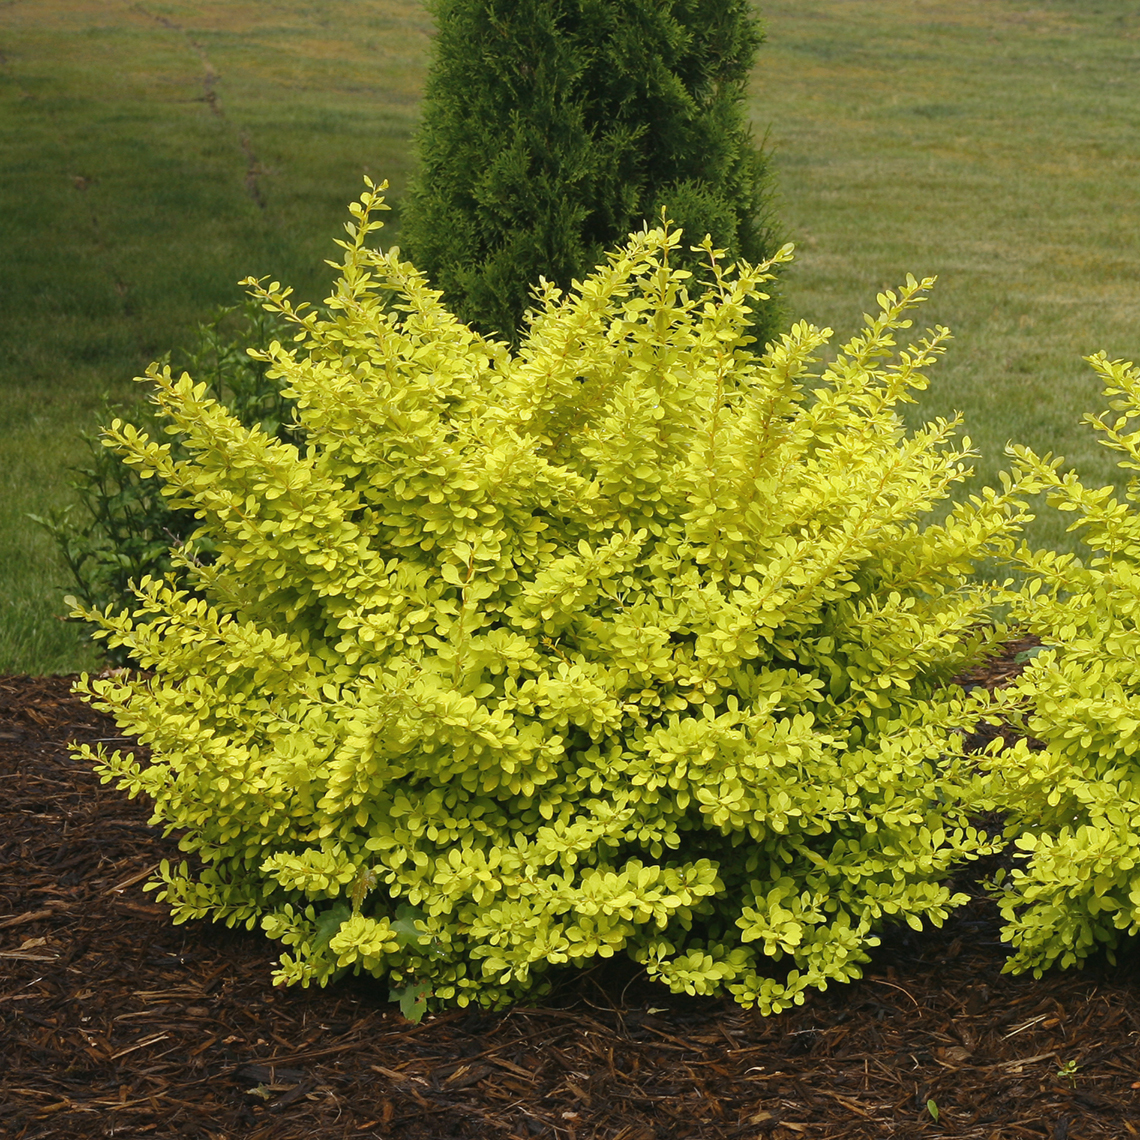 Rounded Sunjoy Citrus Berberis with yellow foliage in landscape